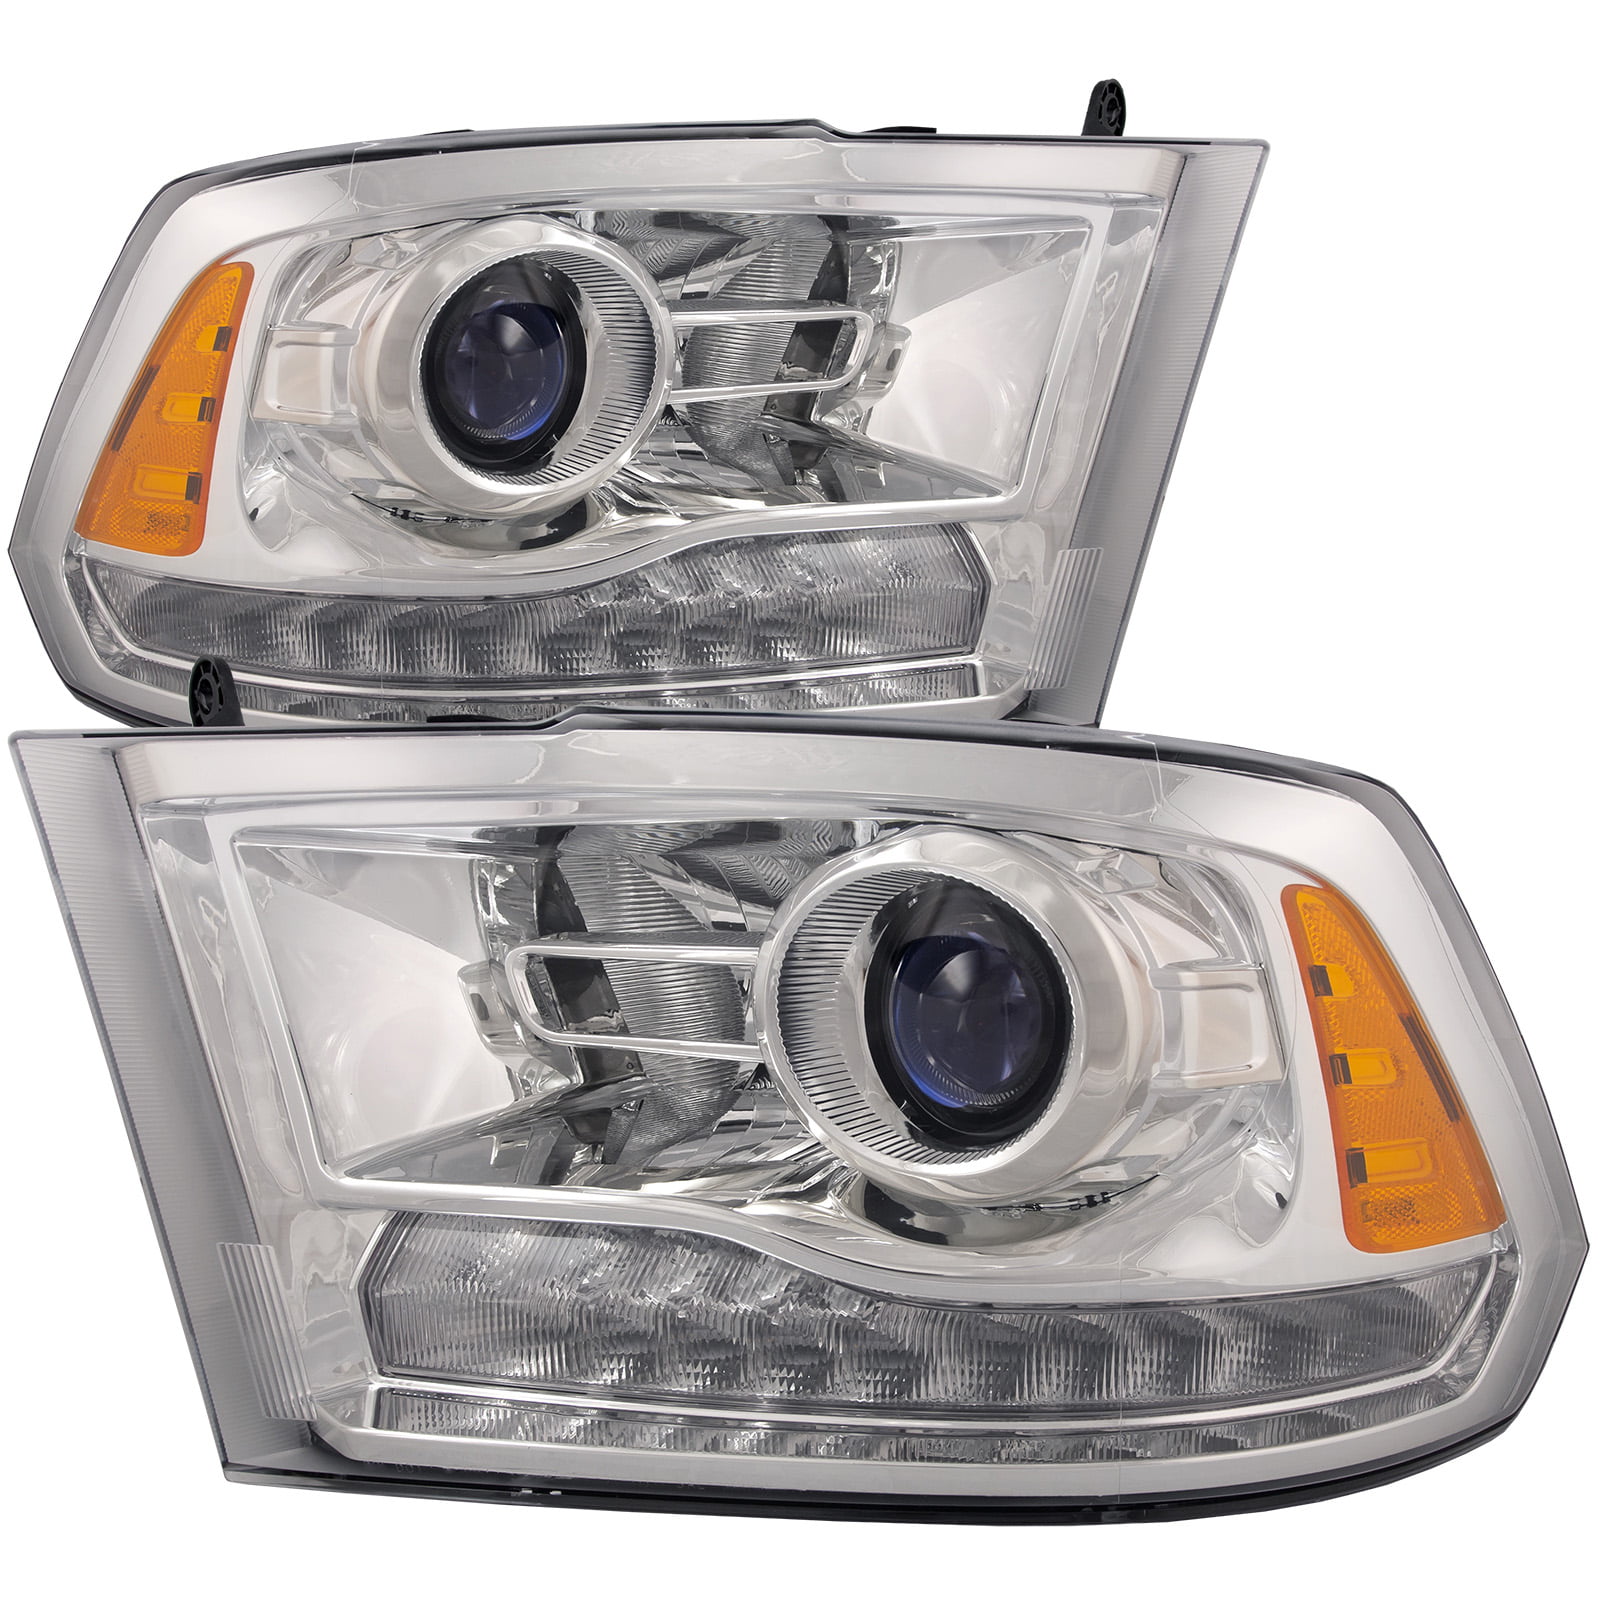 HEADLIGHTSDEPOT Chrome Headlights Compatible with Dodge Ram 1500 2500 3500 Includes Left Driver and Right Passenger Side Headlamps 